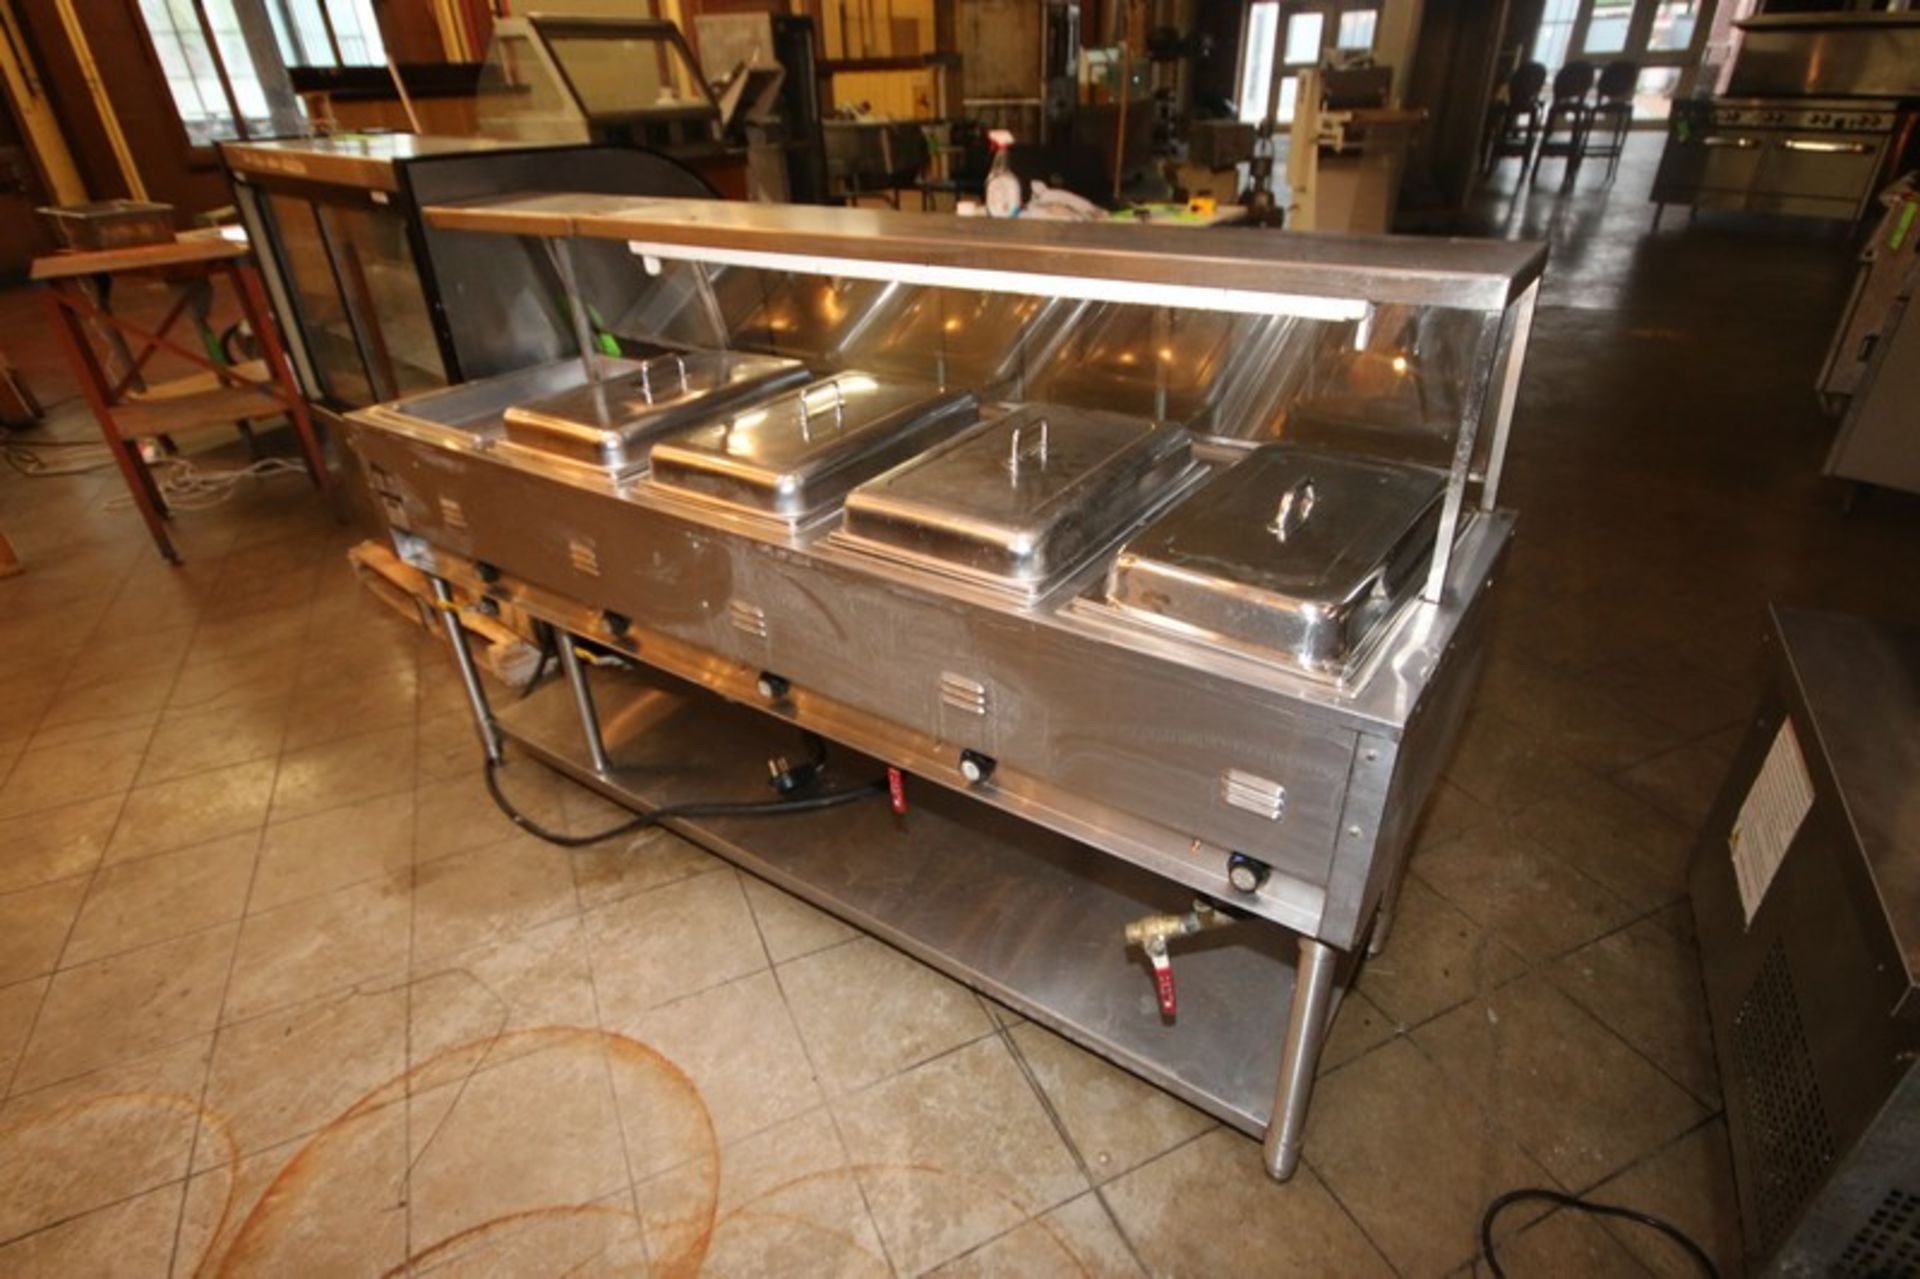 CSP S/S Serving Counter, with 5-Warming Compartments, Overall Dims. of Counter: Aprox. 79" L x 35" W - Image 3 of 6